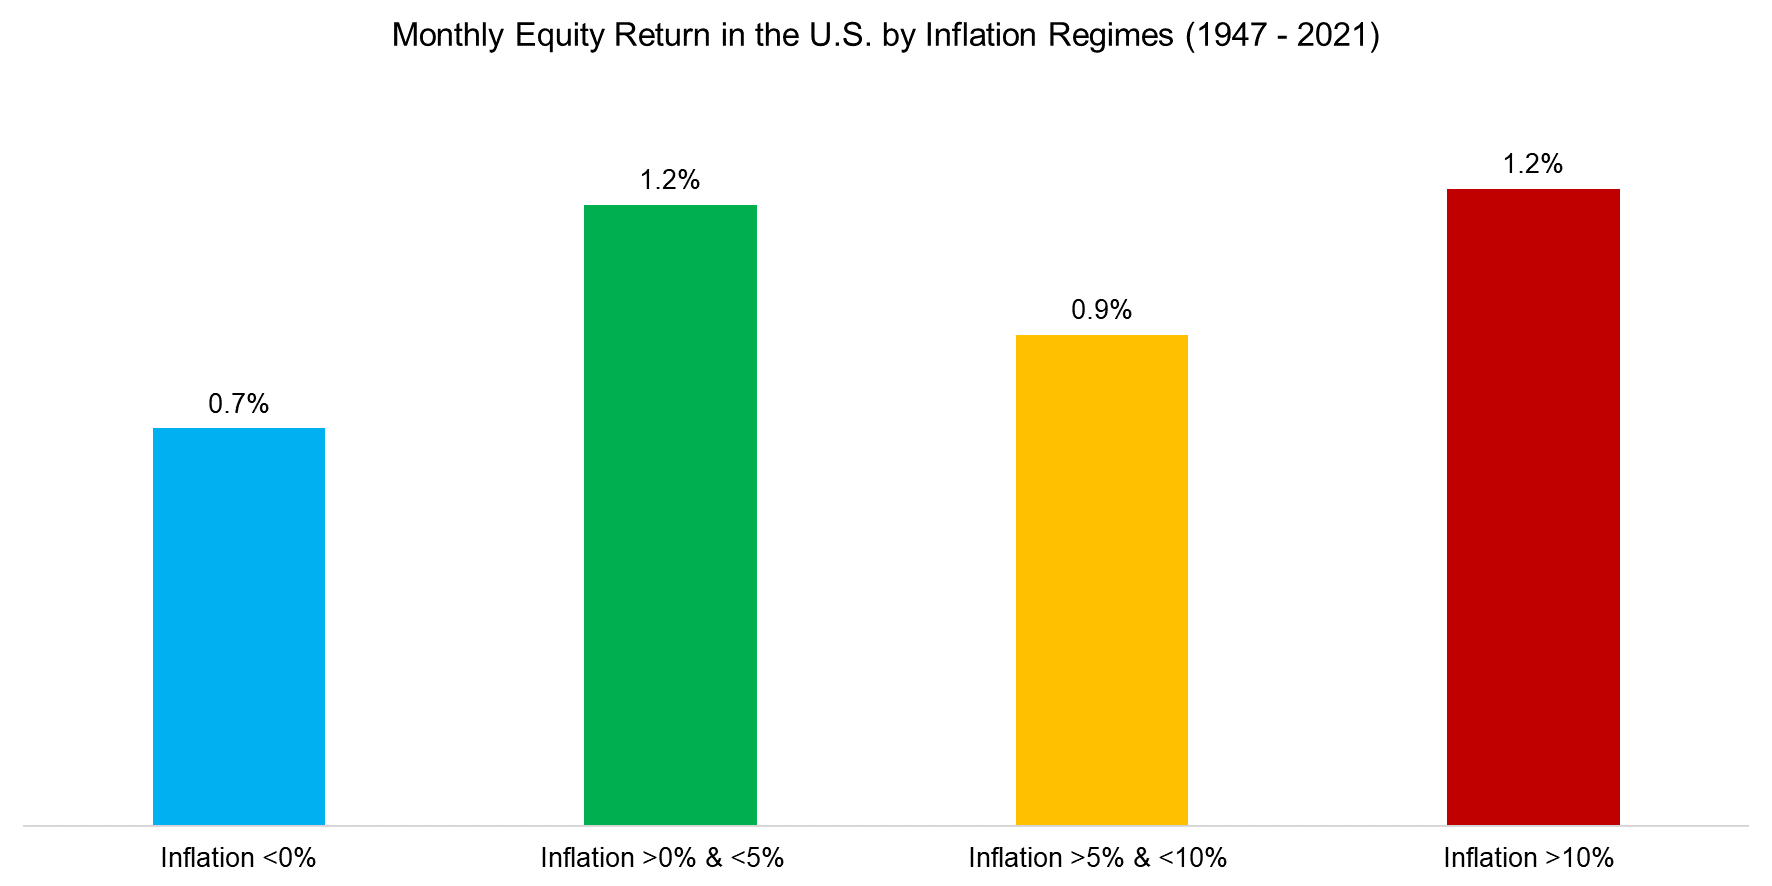 Monthly Equity Return in the U.S. by Inflation Regimes (1947 - 2021)